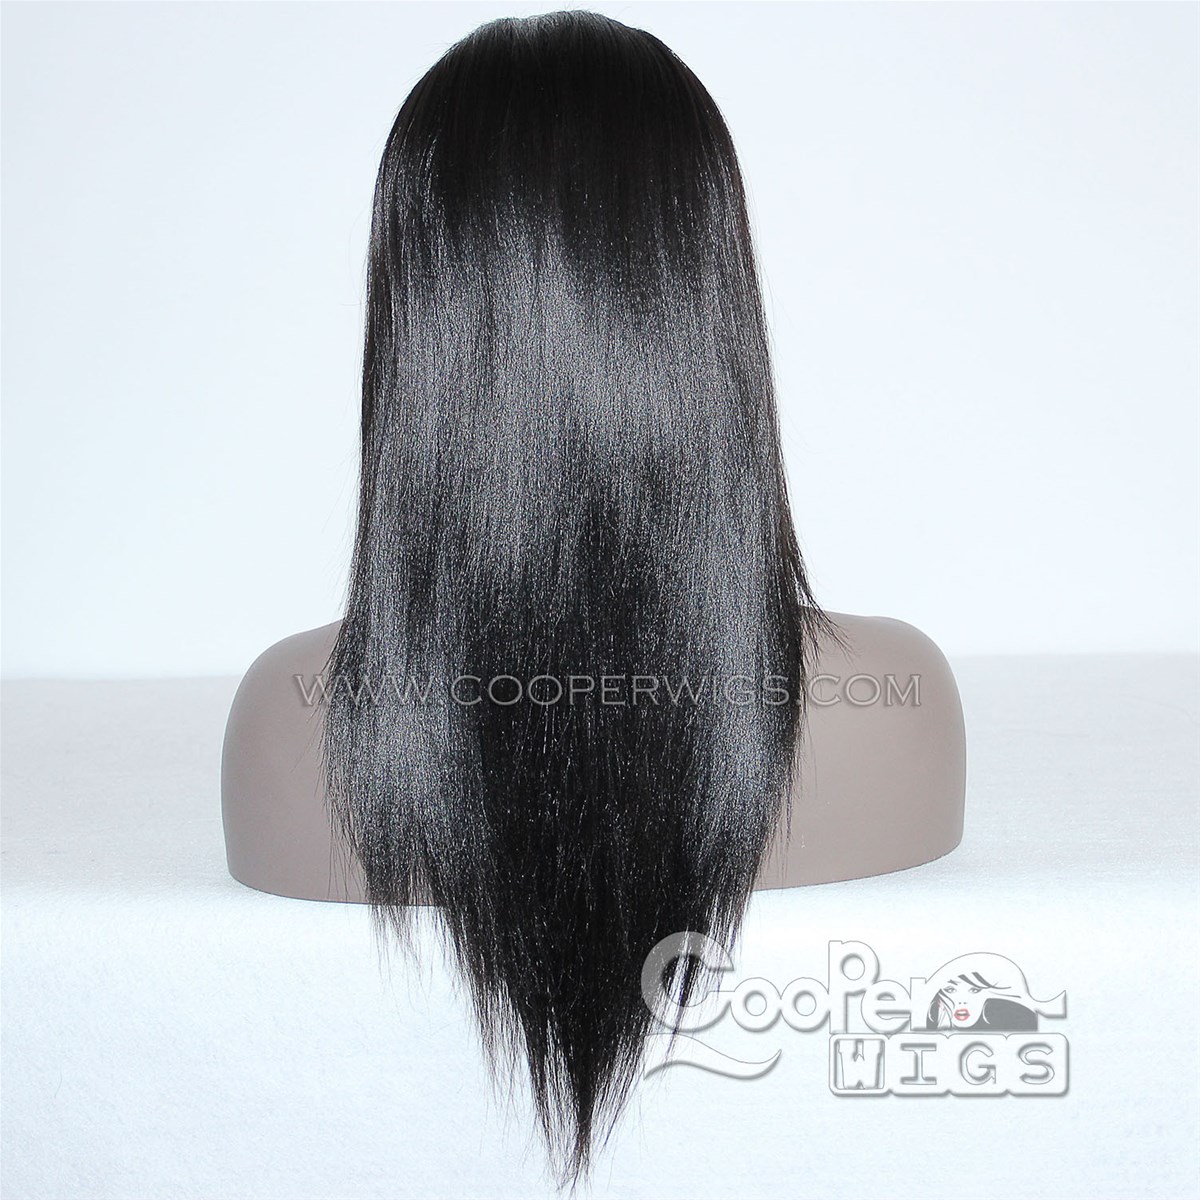 Cooper Wigs Lace Front Human Hair Wigs for Women Black Color Brazilian